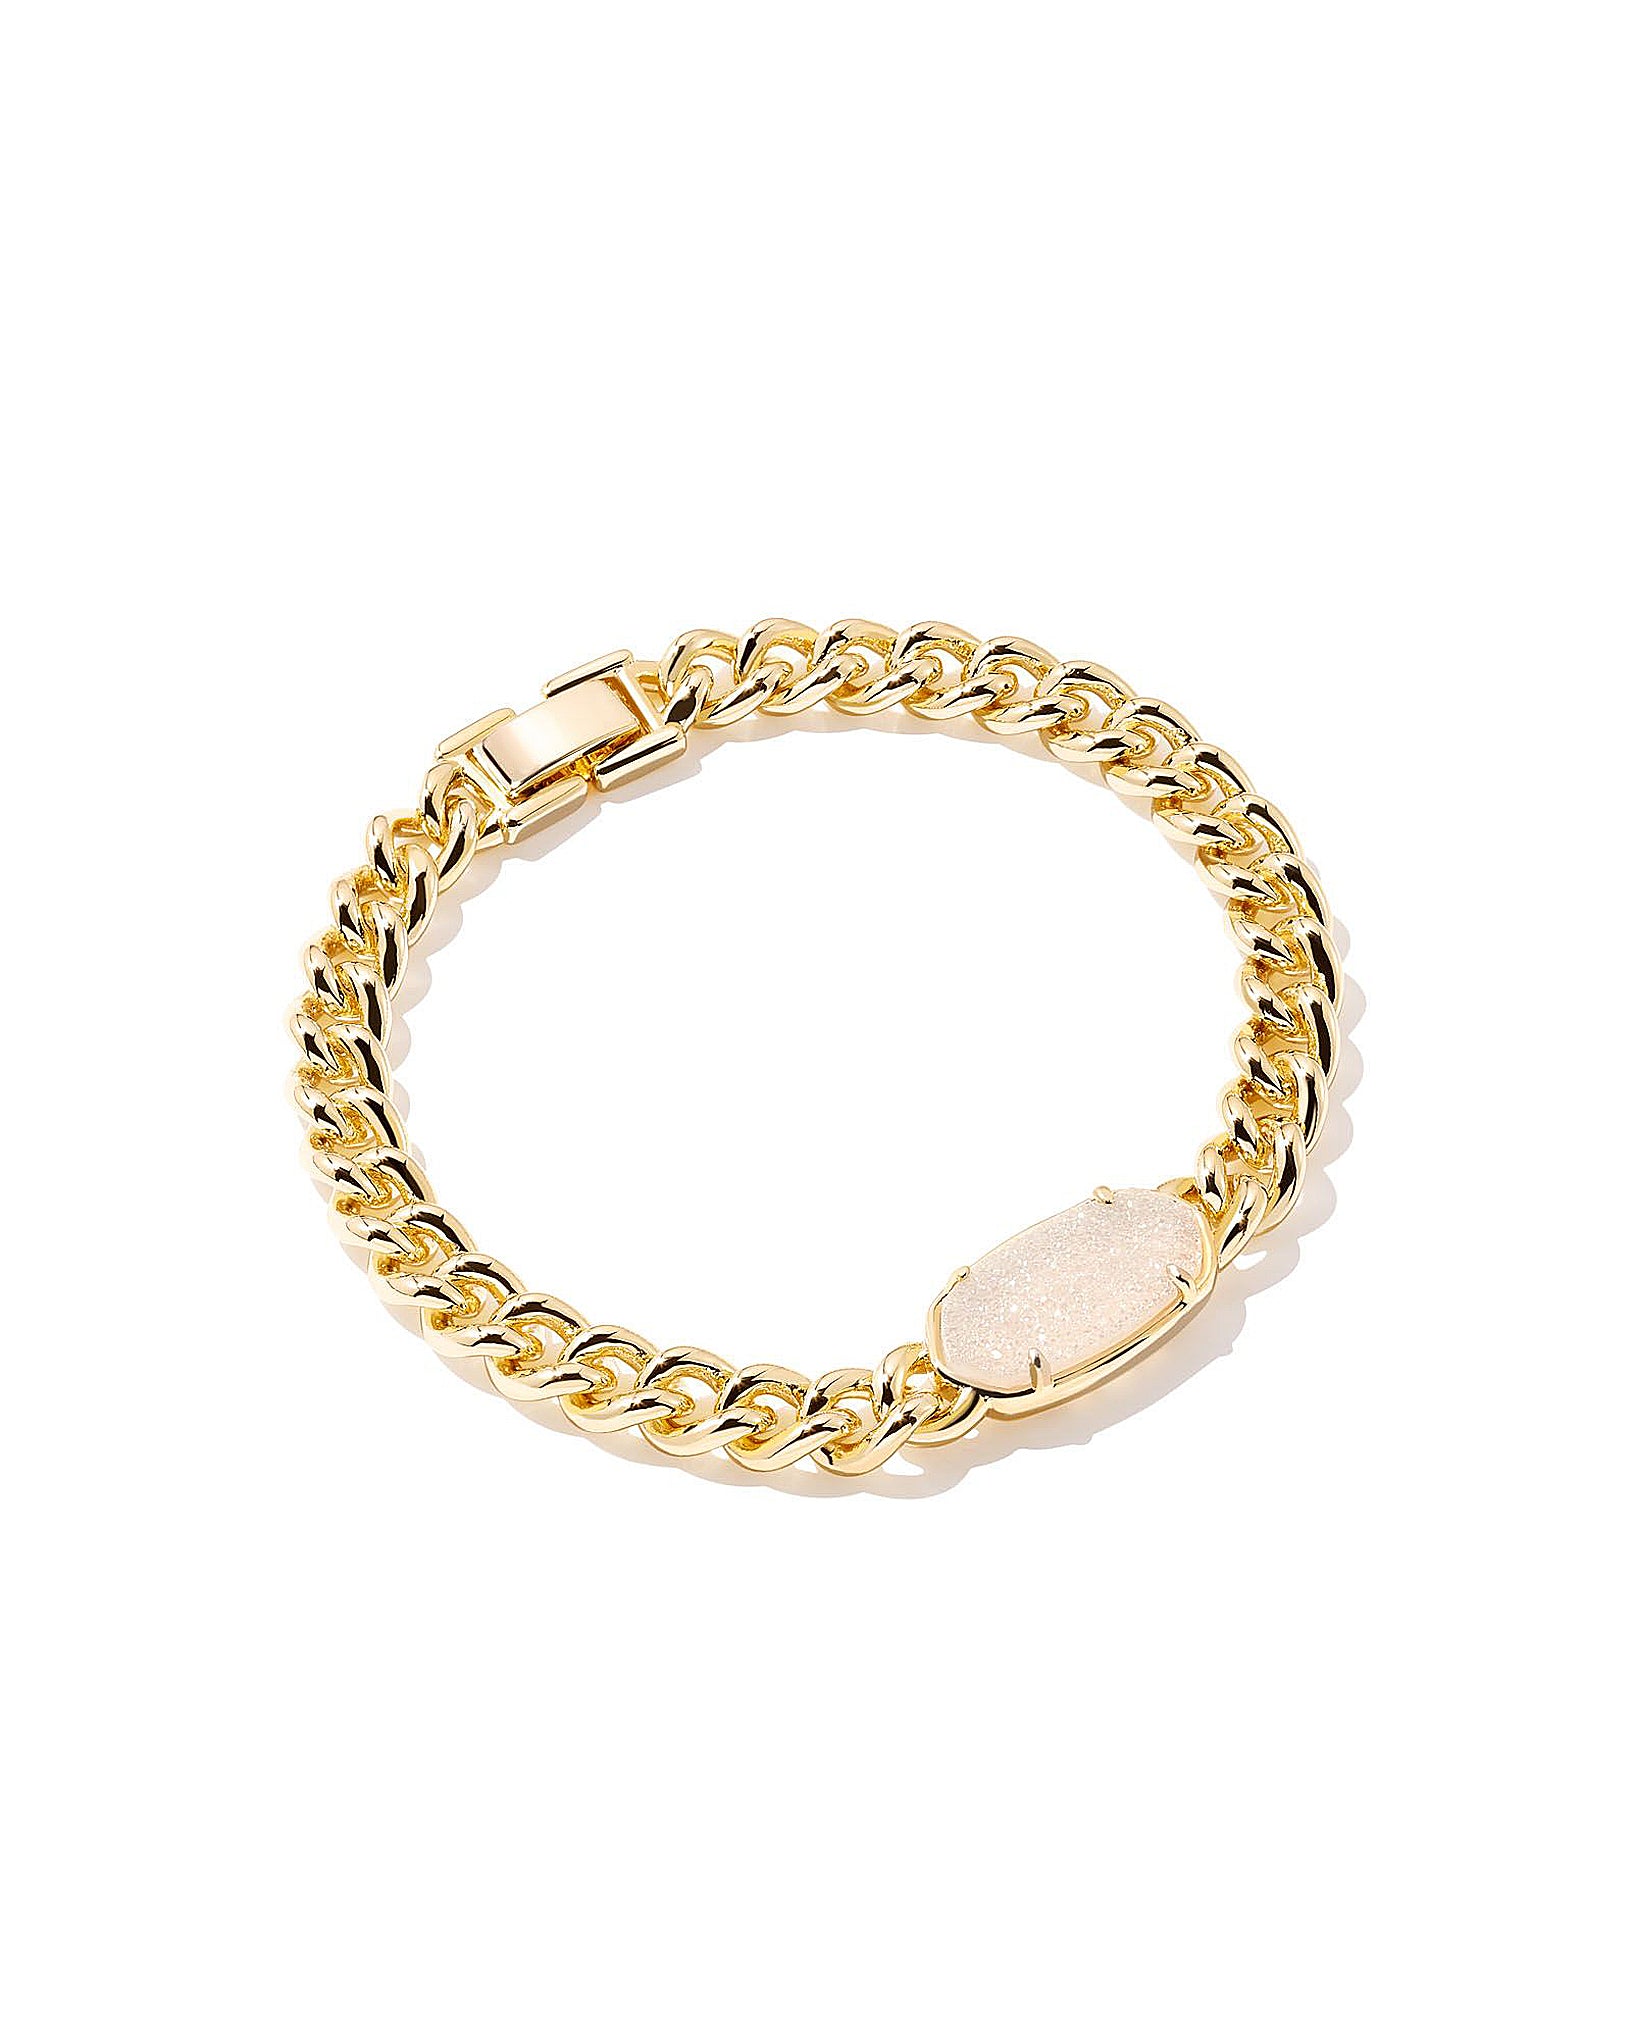 Kendra Scott Elaina Oval Chain Bracelet in Iridescent Drusy and Gold Plated